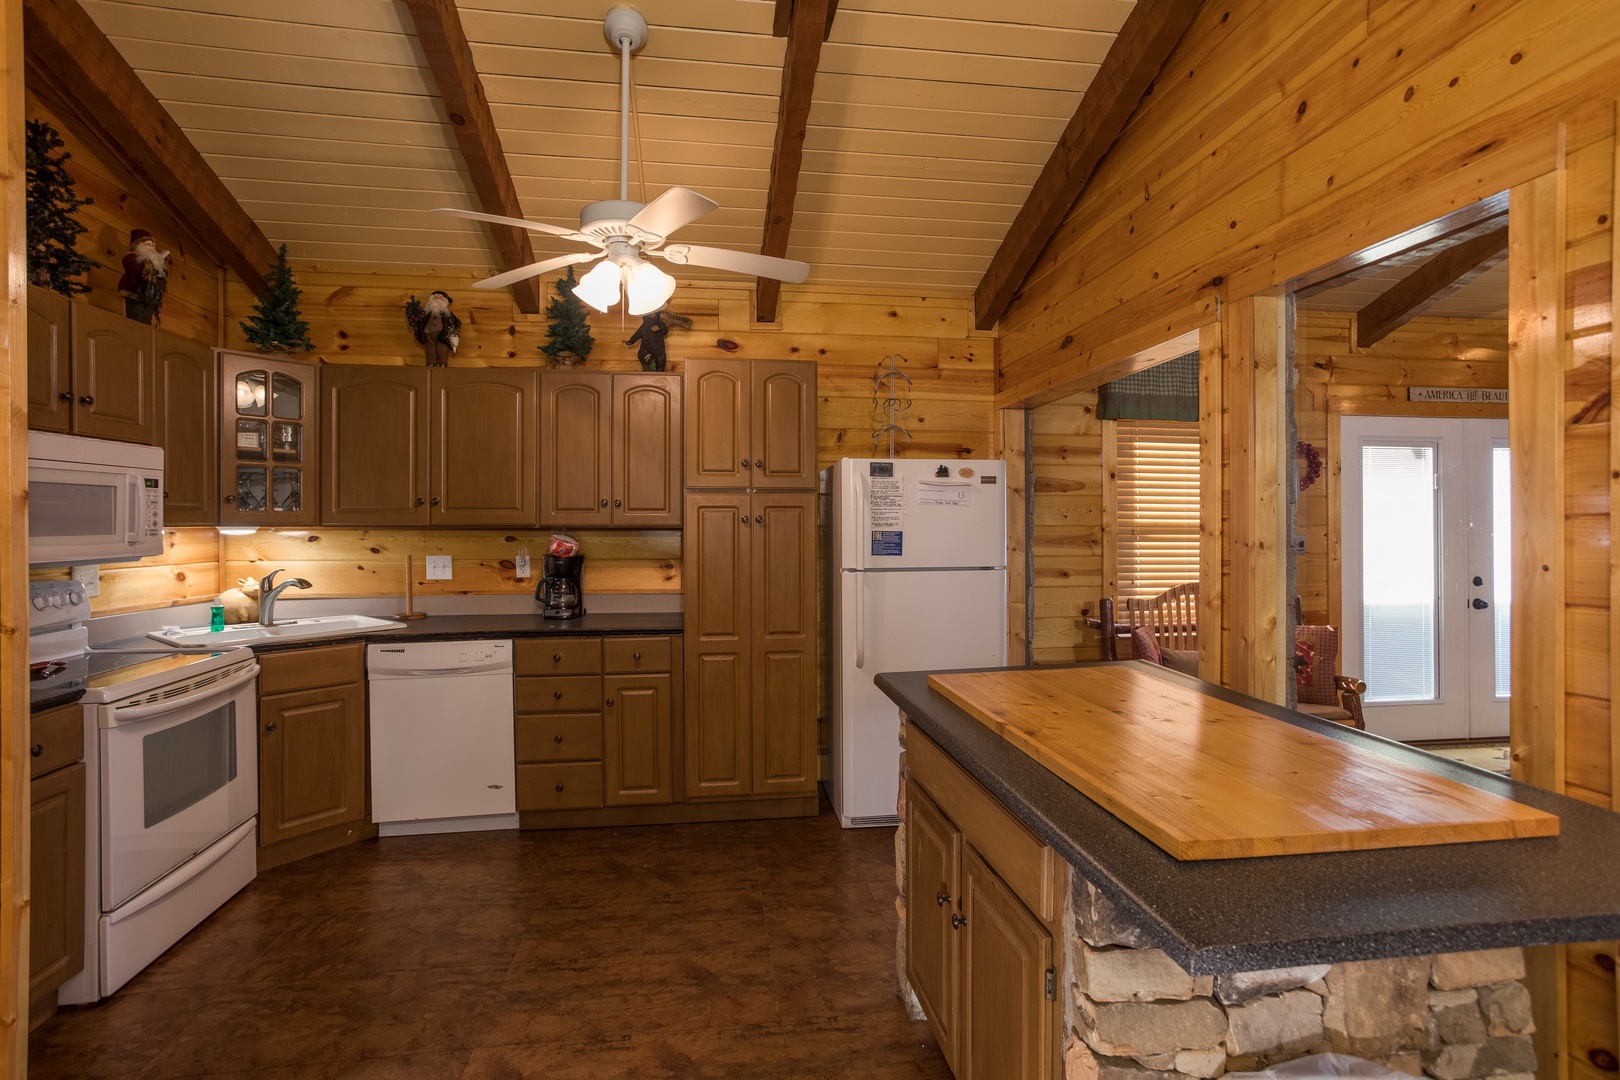 Kitchen with white appliances at Rustic Ranch, a 2 bedroom cabin rental located in Pigeon Forge